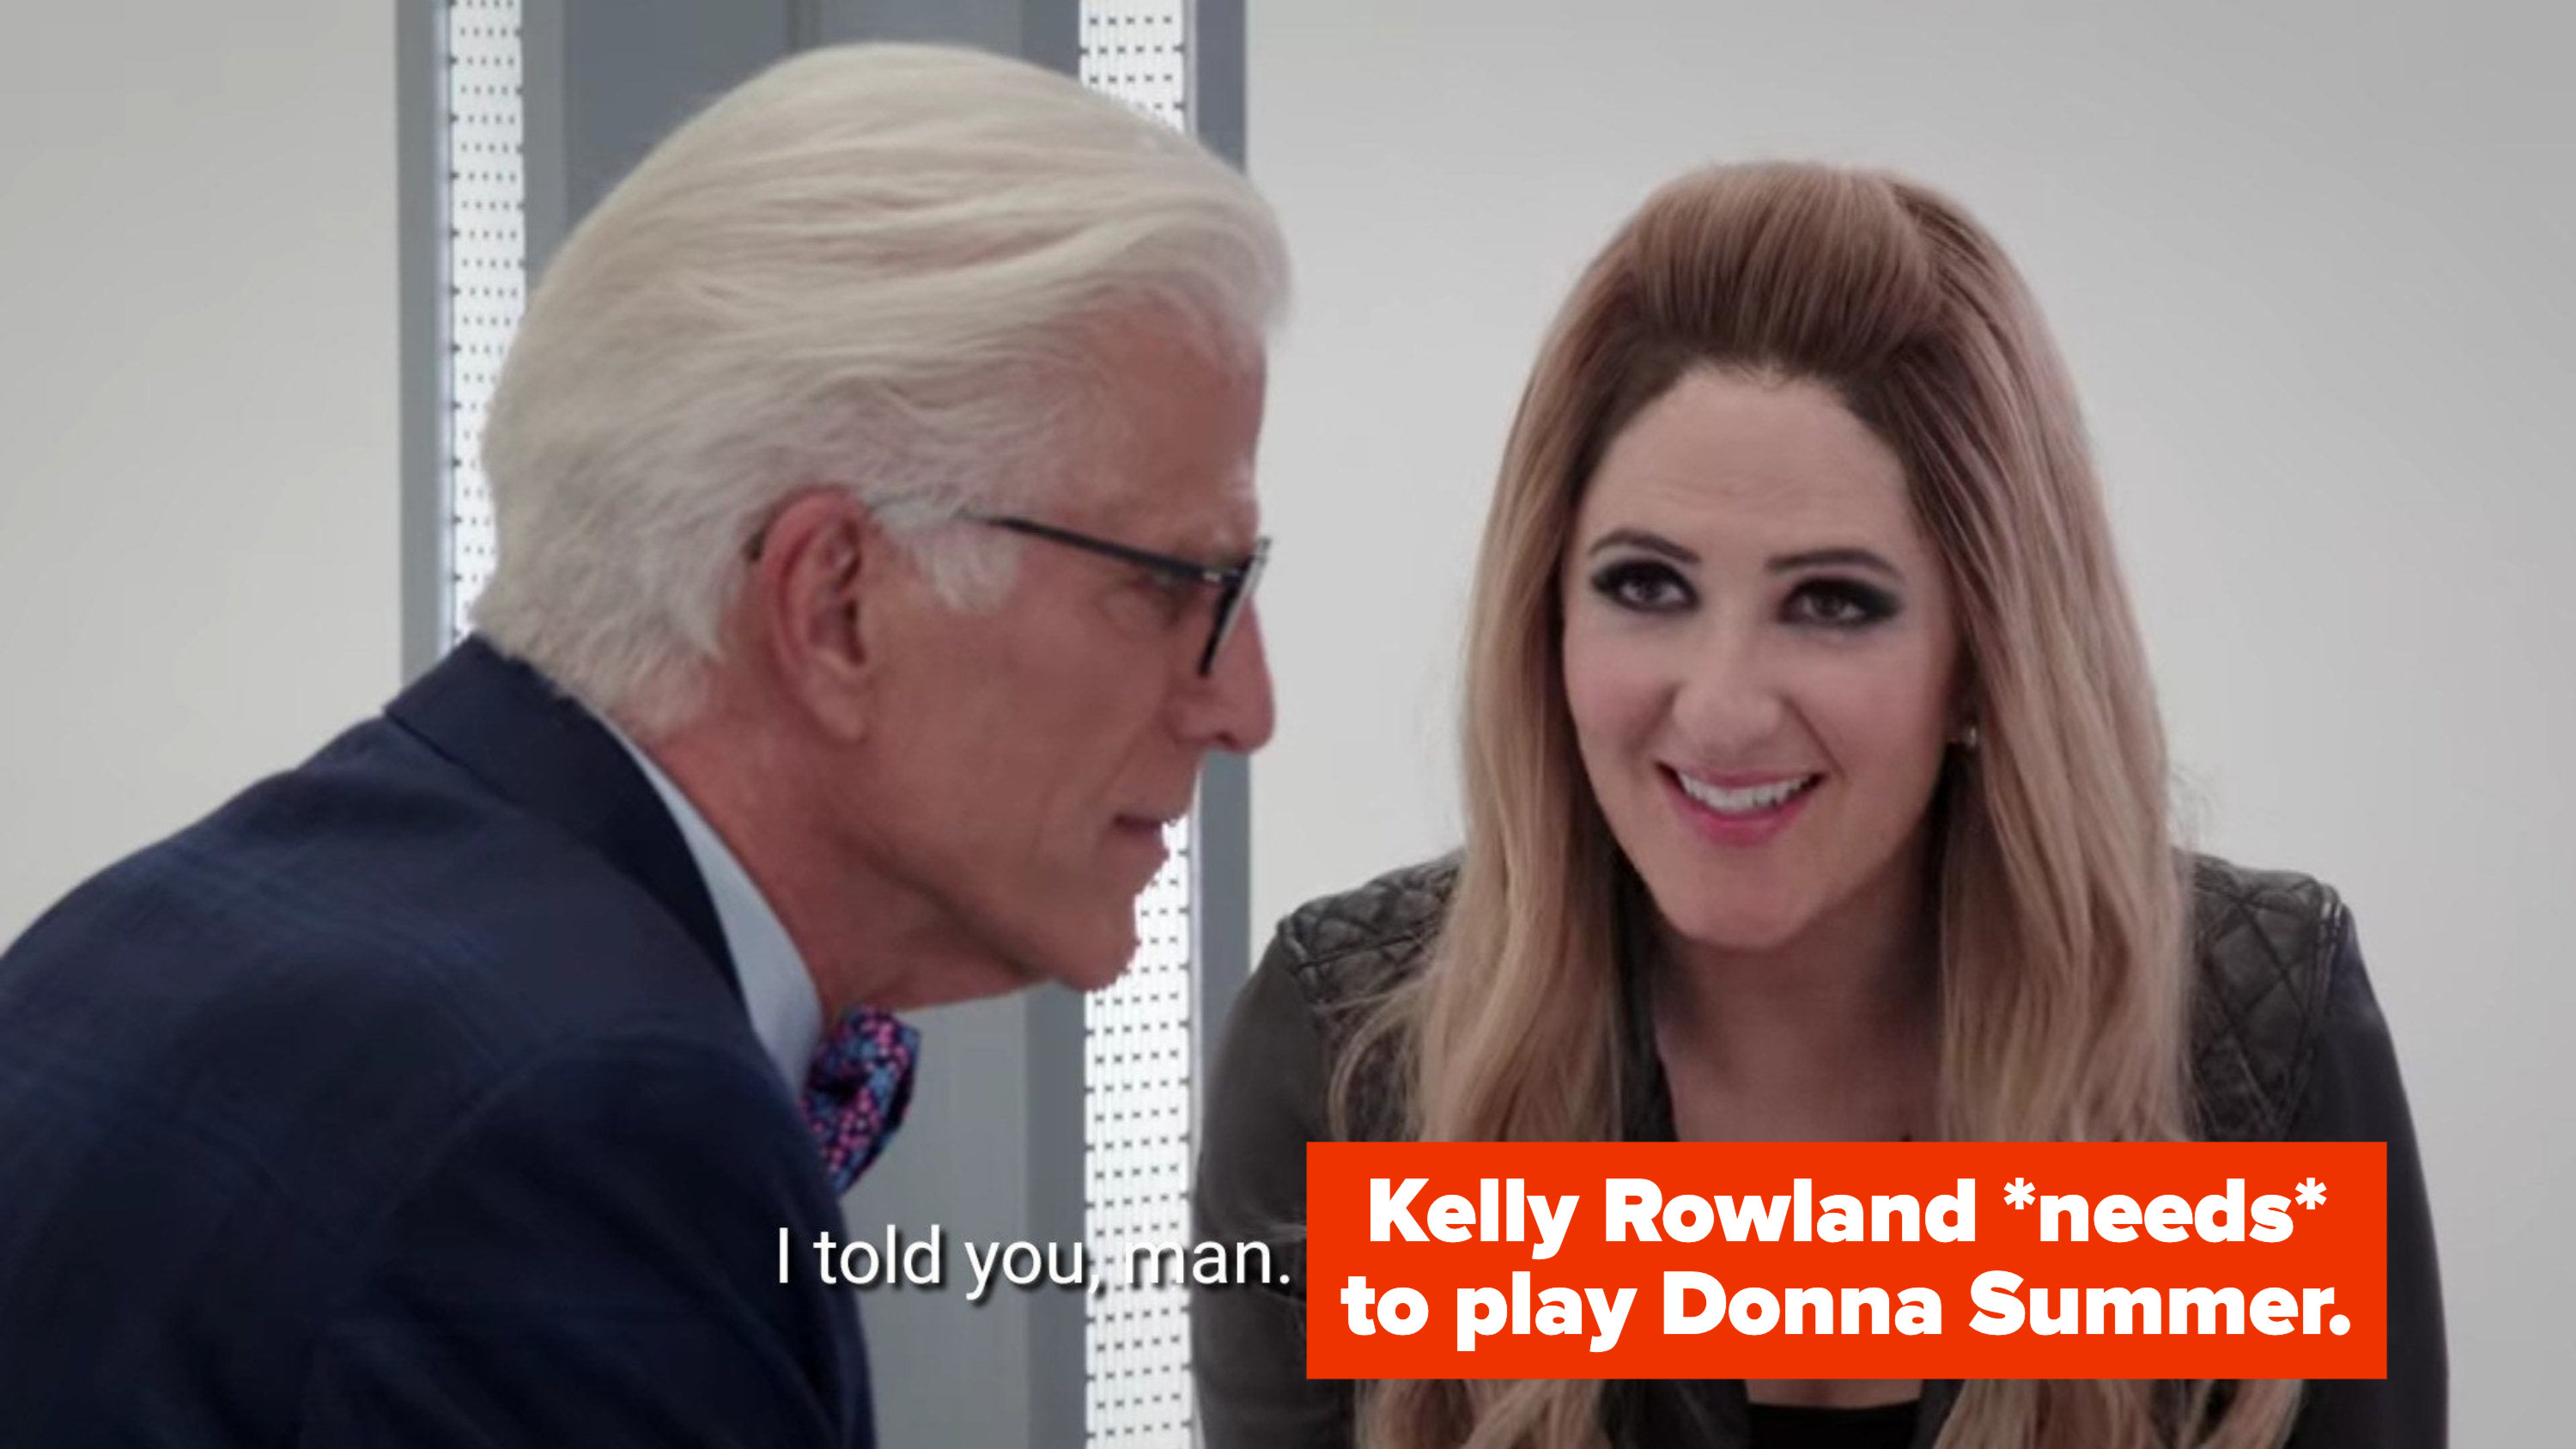 Reimagined &quot;Good Place&quot; meme that reads: &quot;I told you, man. Kelly Rowland *needs* to play Donna Summer&quot;